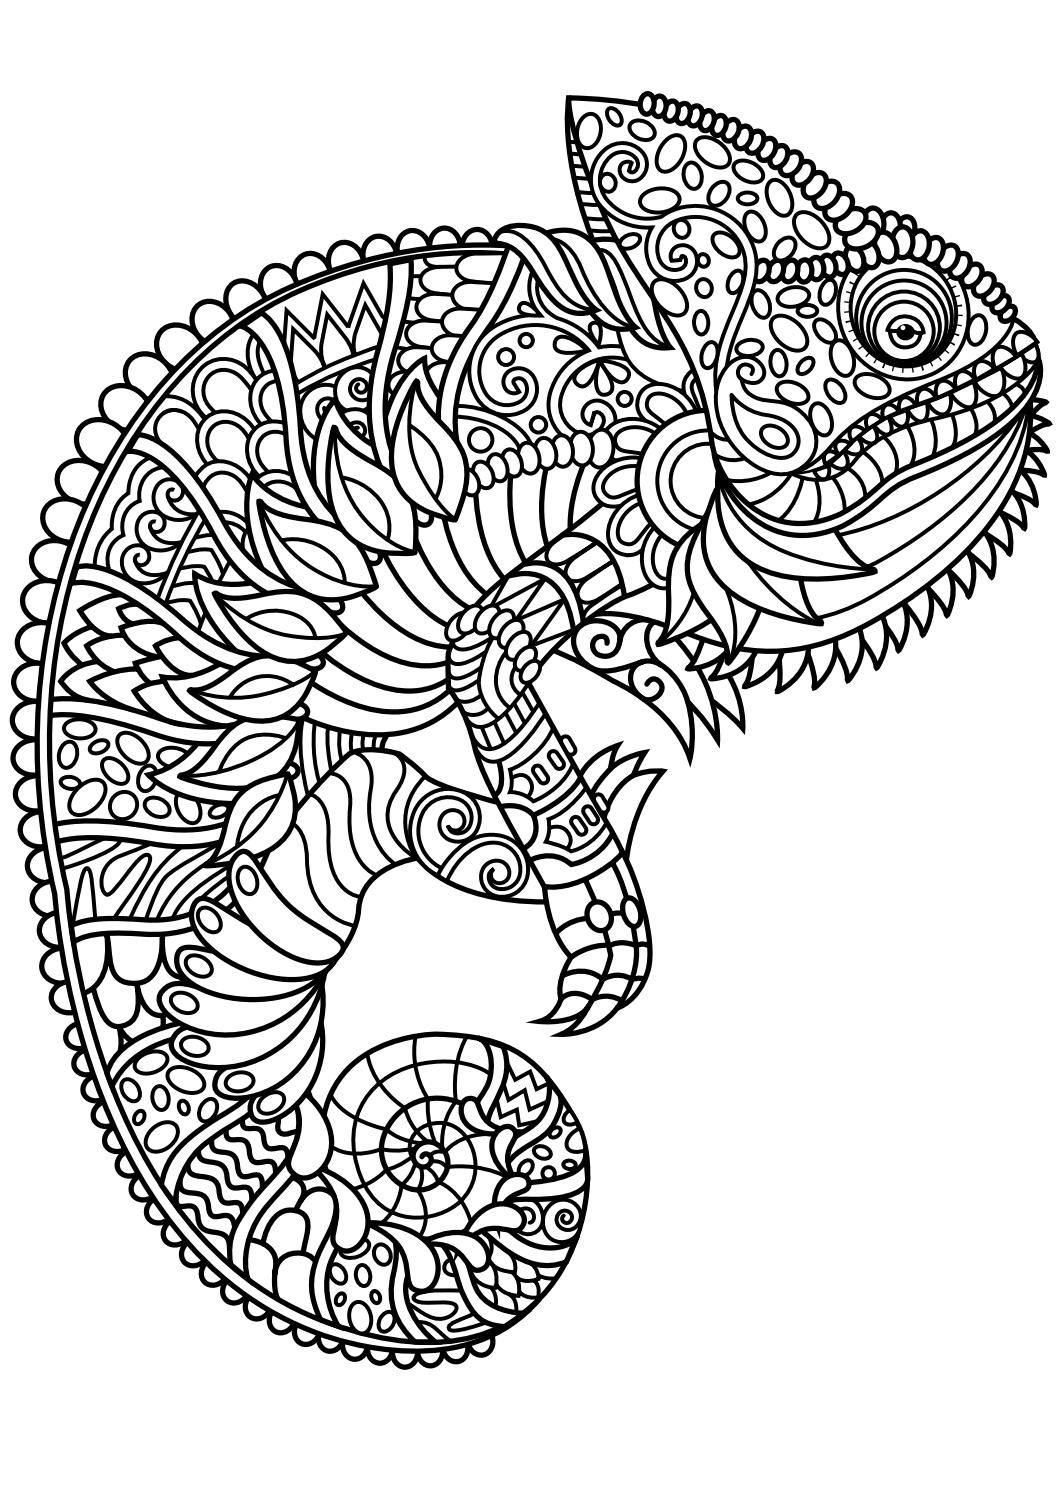 fun-coloring-pages-for-adults-at-getcolorings-free-printable-colorings-pages-to-print-and